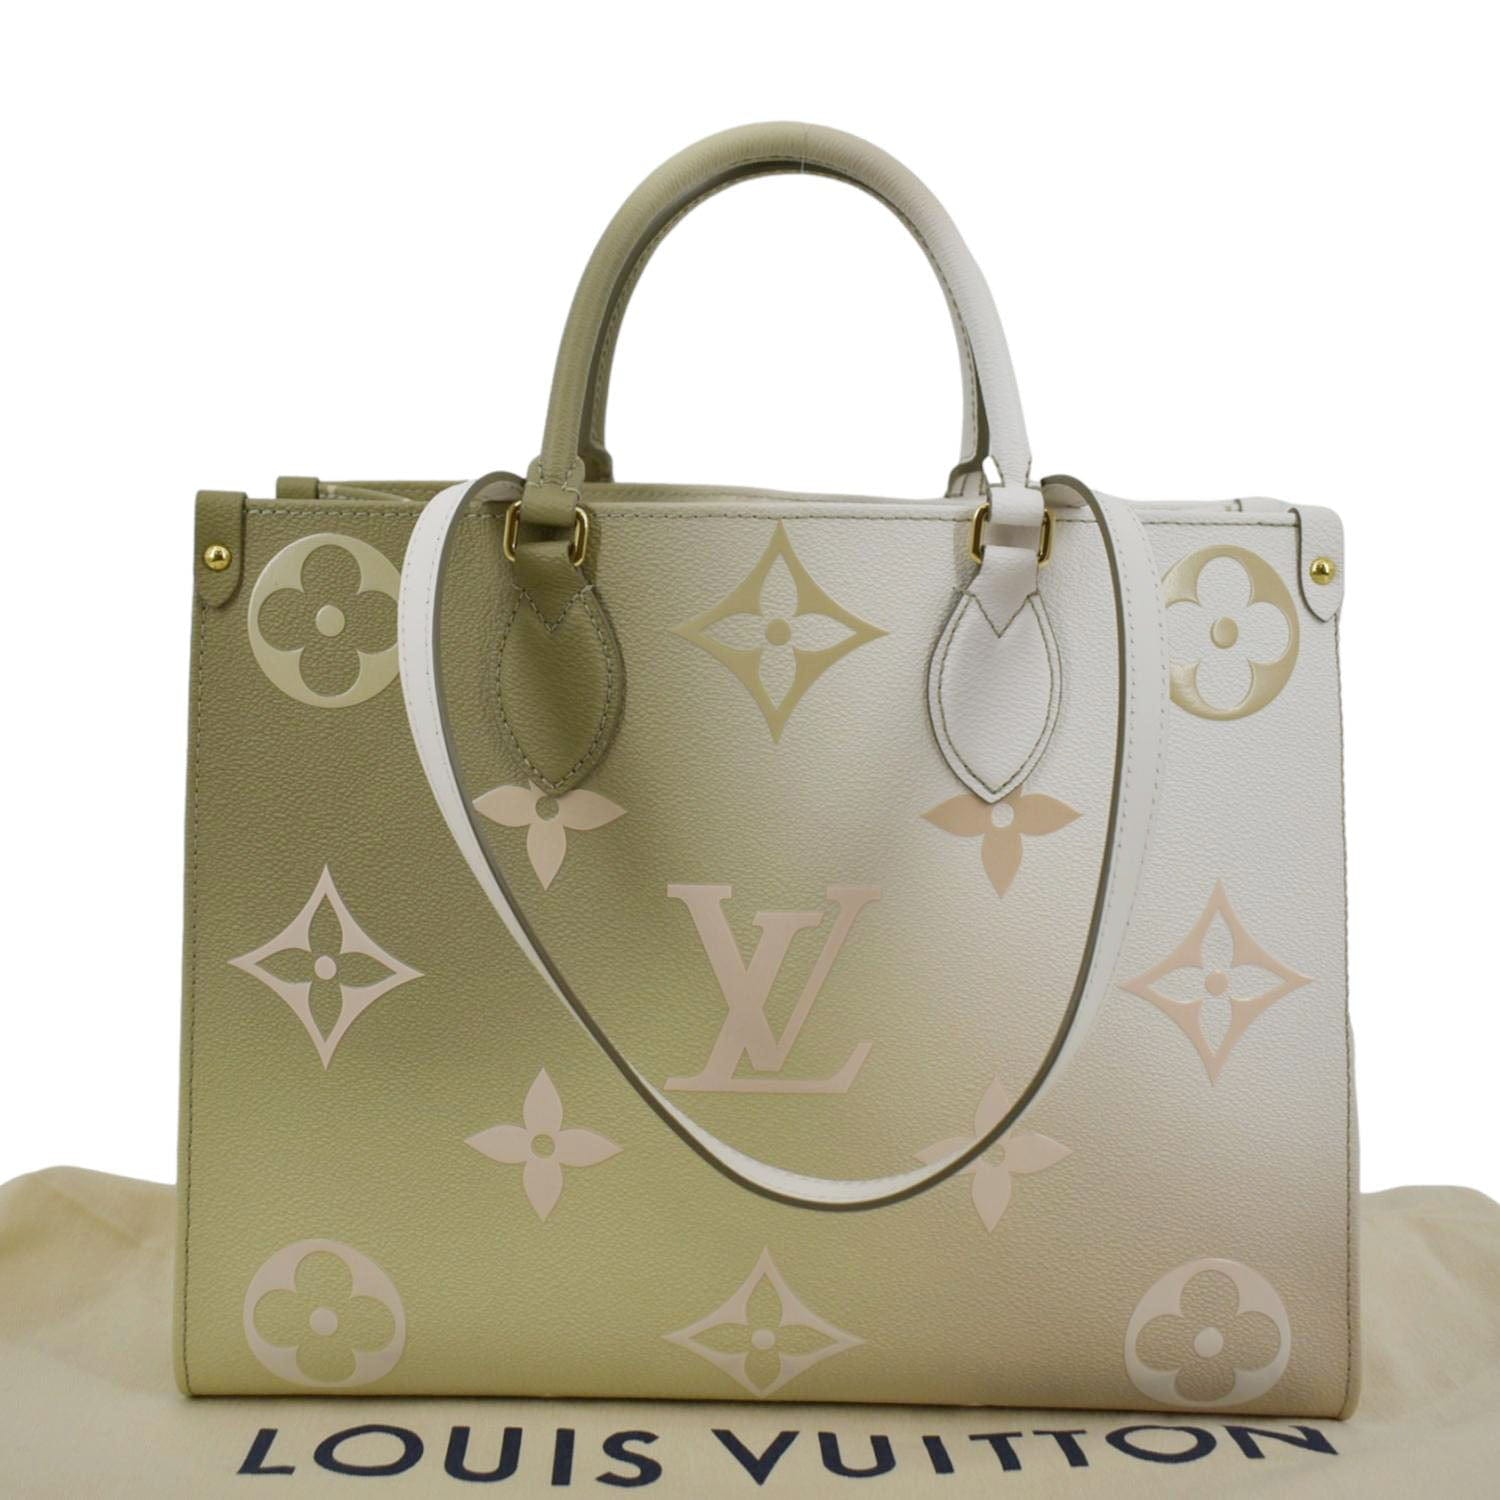 Help me to check if it is already microchipped this model.. : r/Louisvuitton